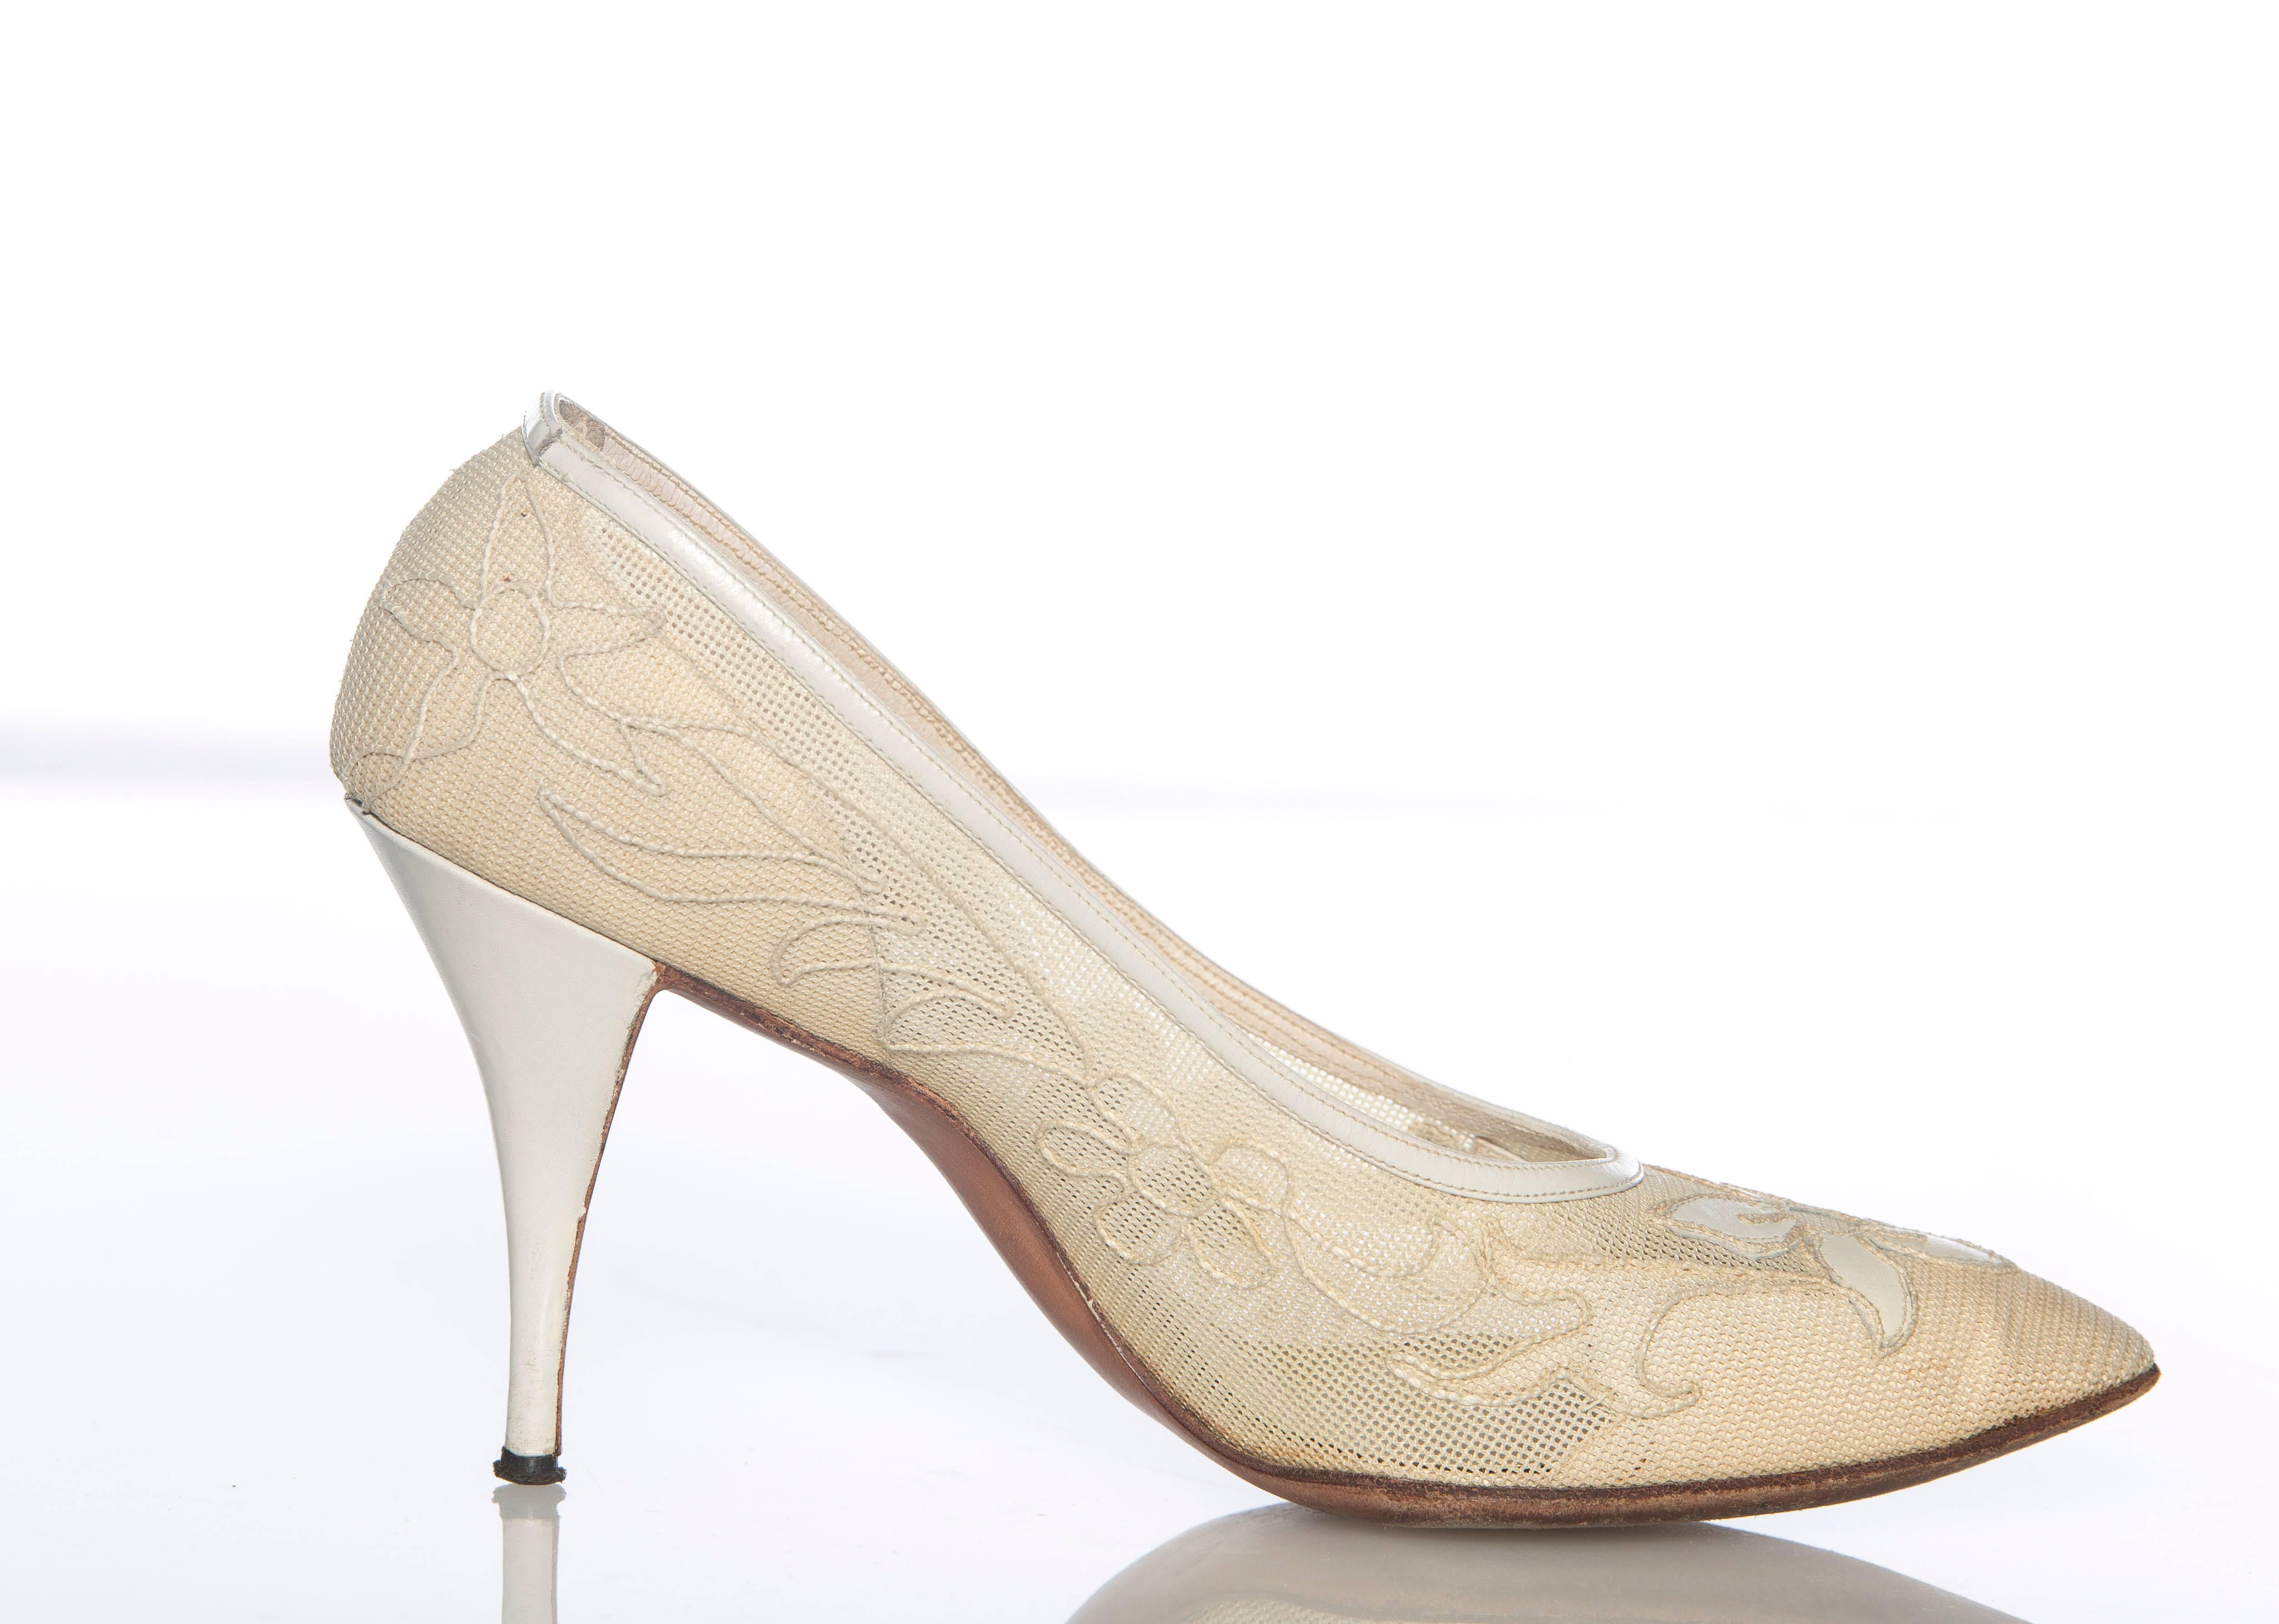 Roger Vivier for Christian Dior, Circa 1950's, cream linen pumps with leather heel and trim and shoe box.